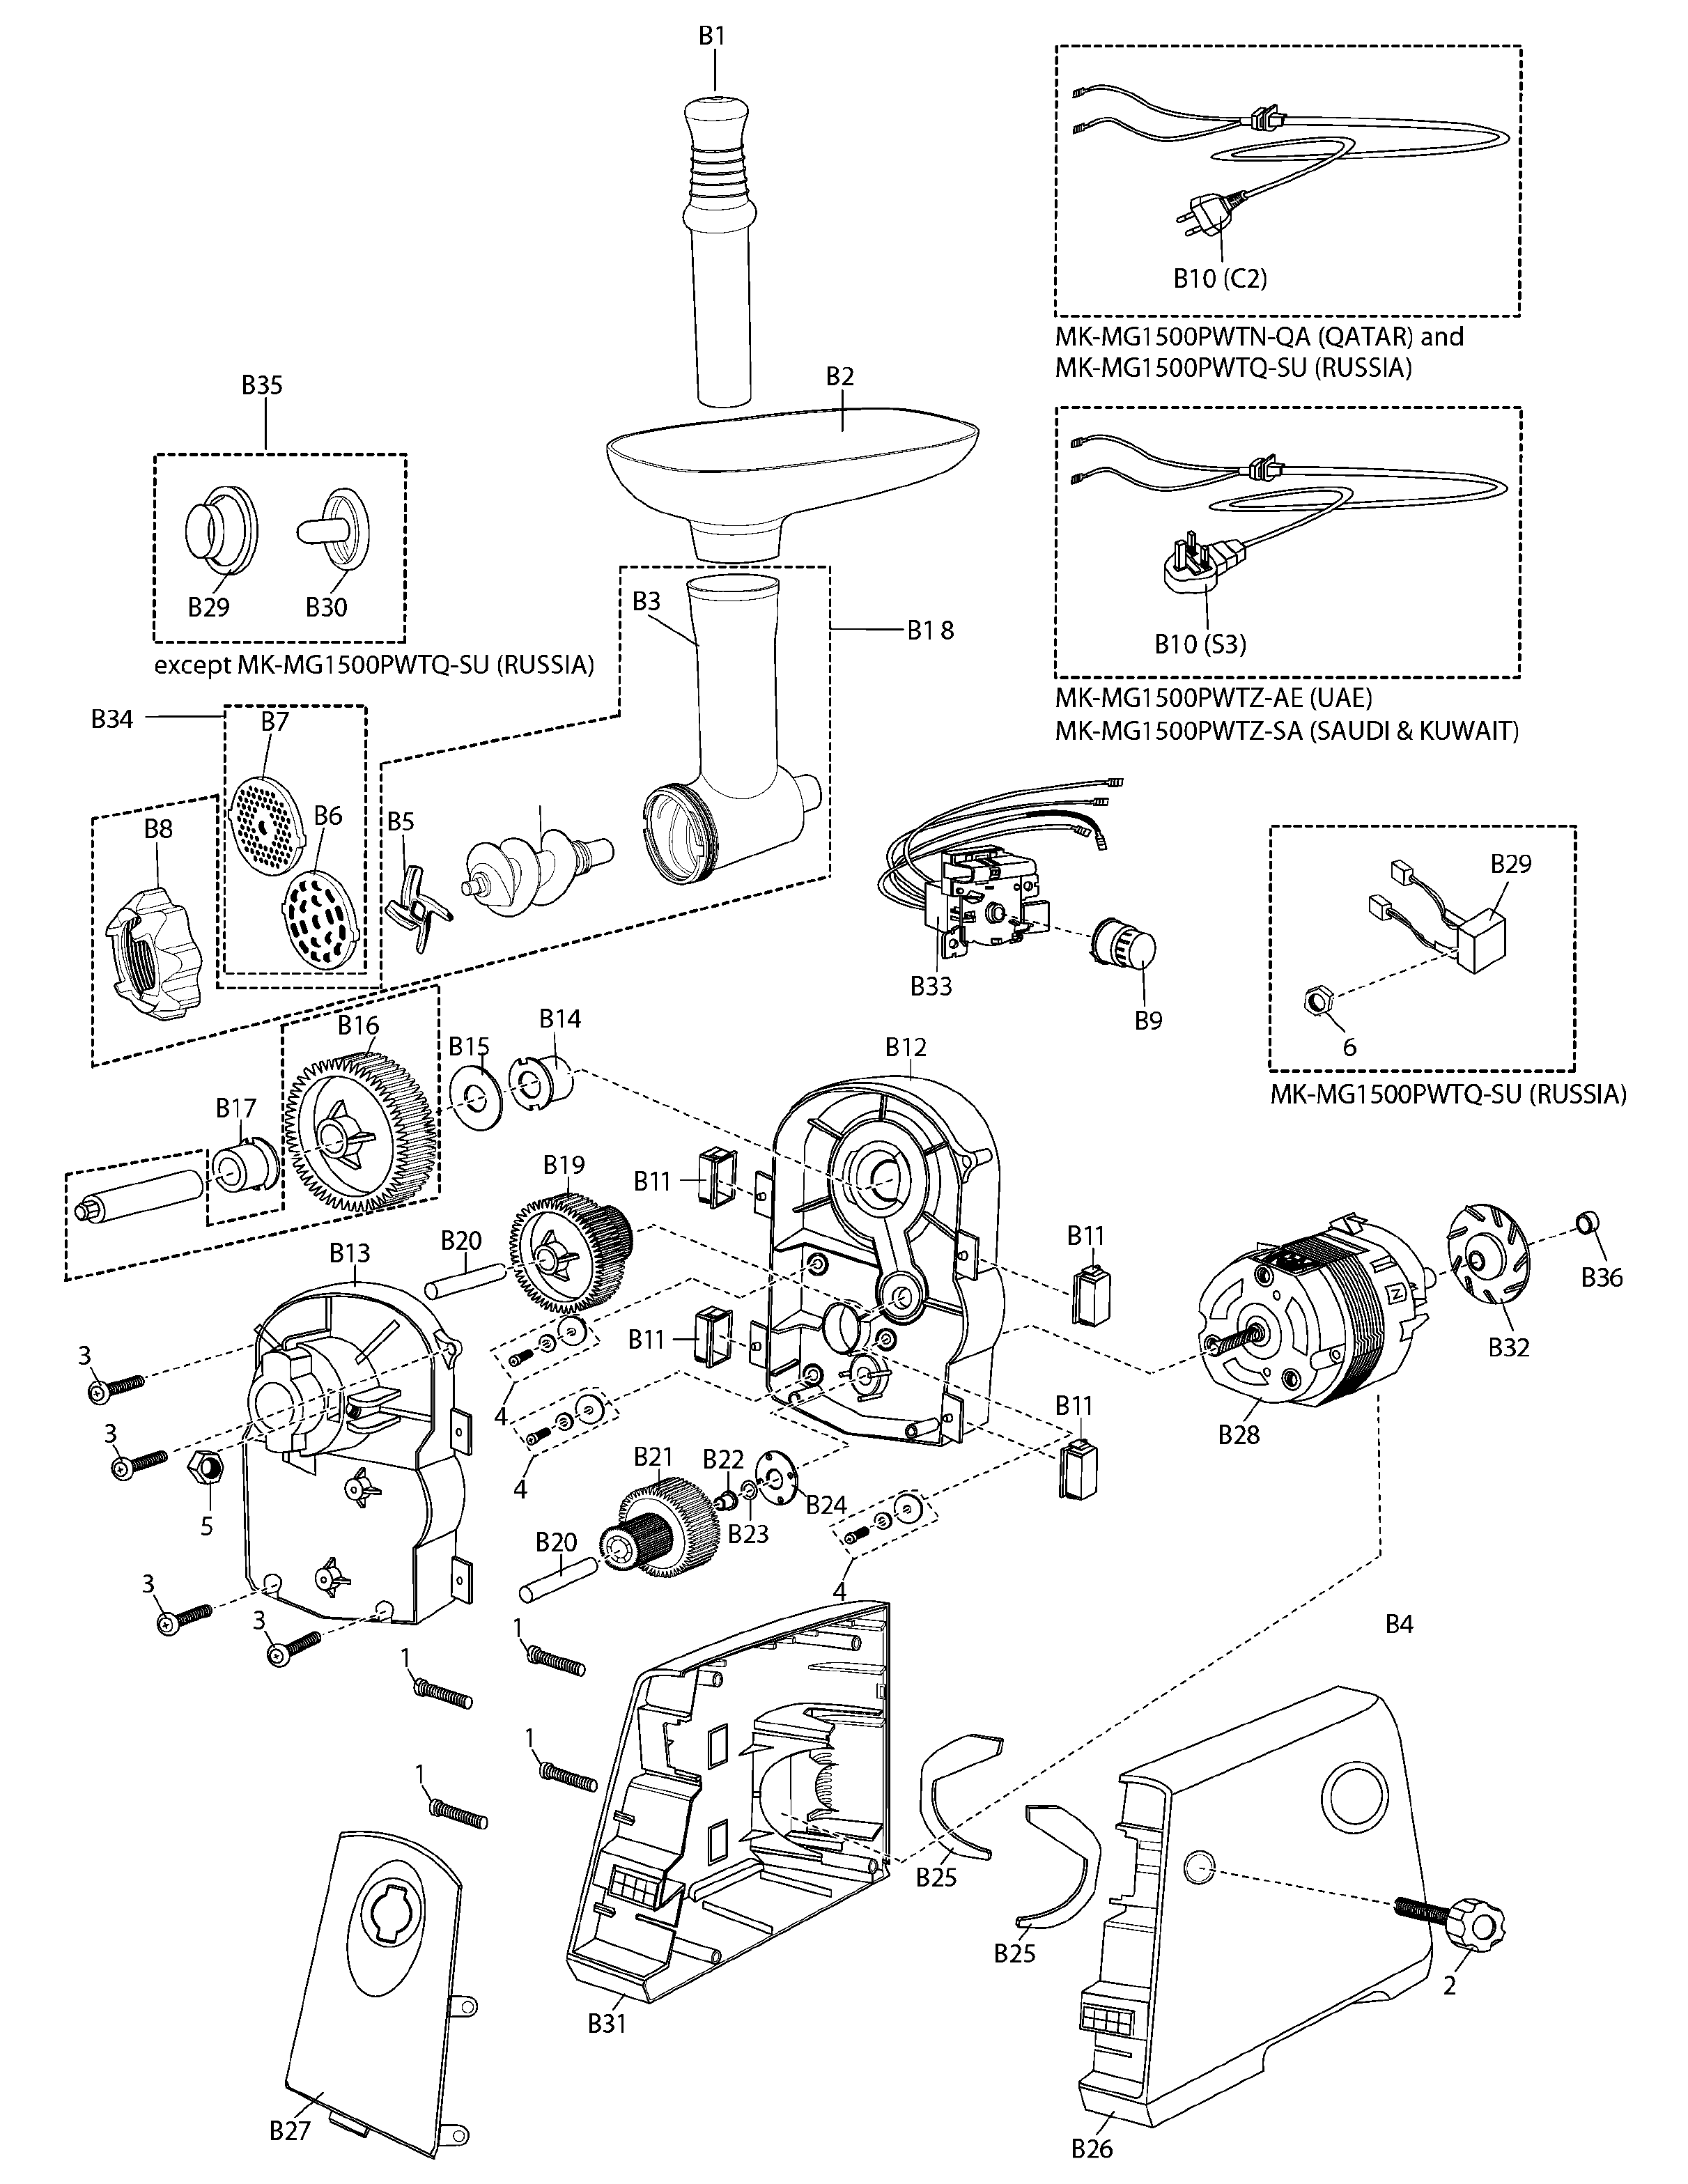 MK-MG1500: Exploded View